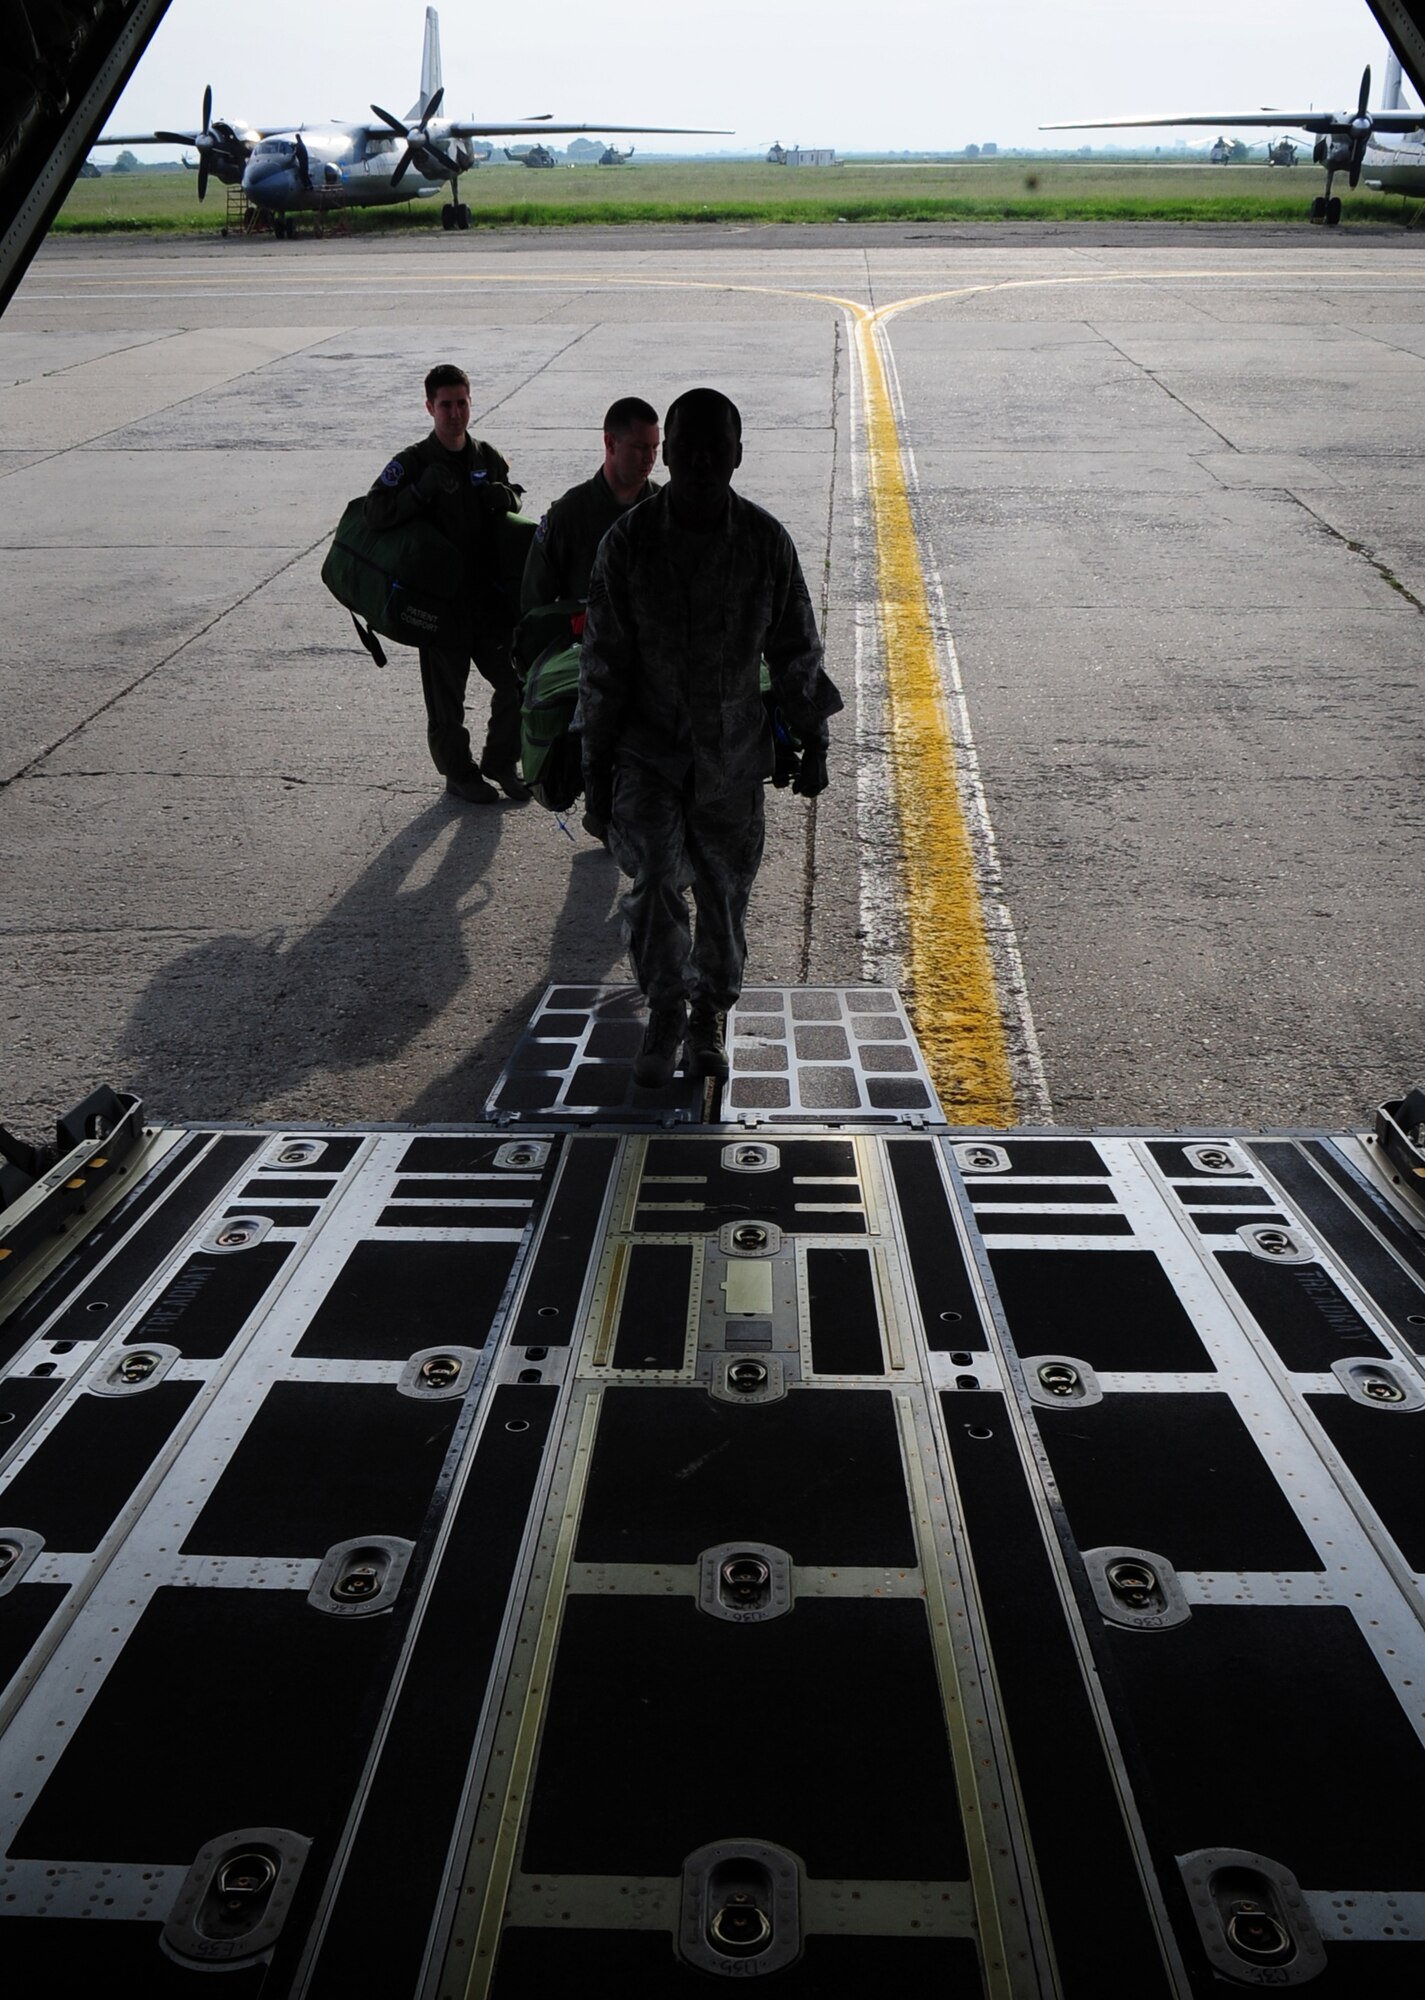 Members of the 86th Aeromedical Evacuation Squadron load medical equipment onto a C-130J in preparation for training and equipment familiarization with Romanian Air Force counterparts, during the joint exercise Carpathian Summer, Otopeni Airlift Base, Romania, May 12, 2010. Carpathian Summer 2010 was an exercise in which the Romanian Air Force invited members of the U.S. military to train with them on their soil and air space, to observe, firsthand, operations in action. This exercise was designed to build partnerships between these nations in an effort to work together more efficiently during real world scenarios. (U.S. Air Force Photo by Staff Sgt. Jocelyn Rich)